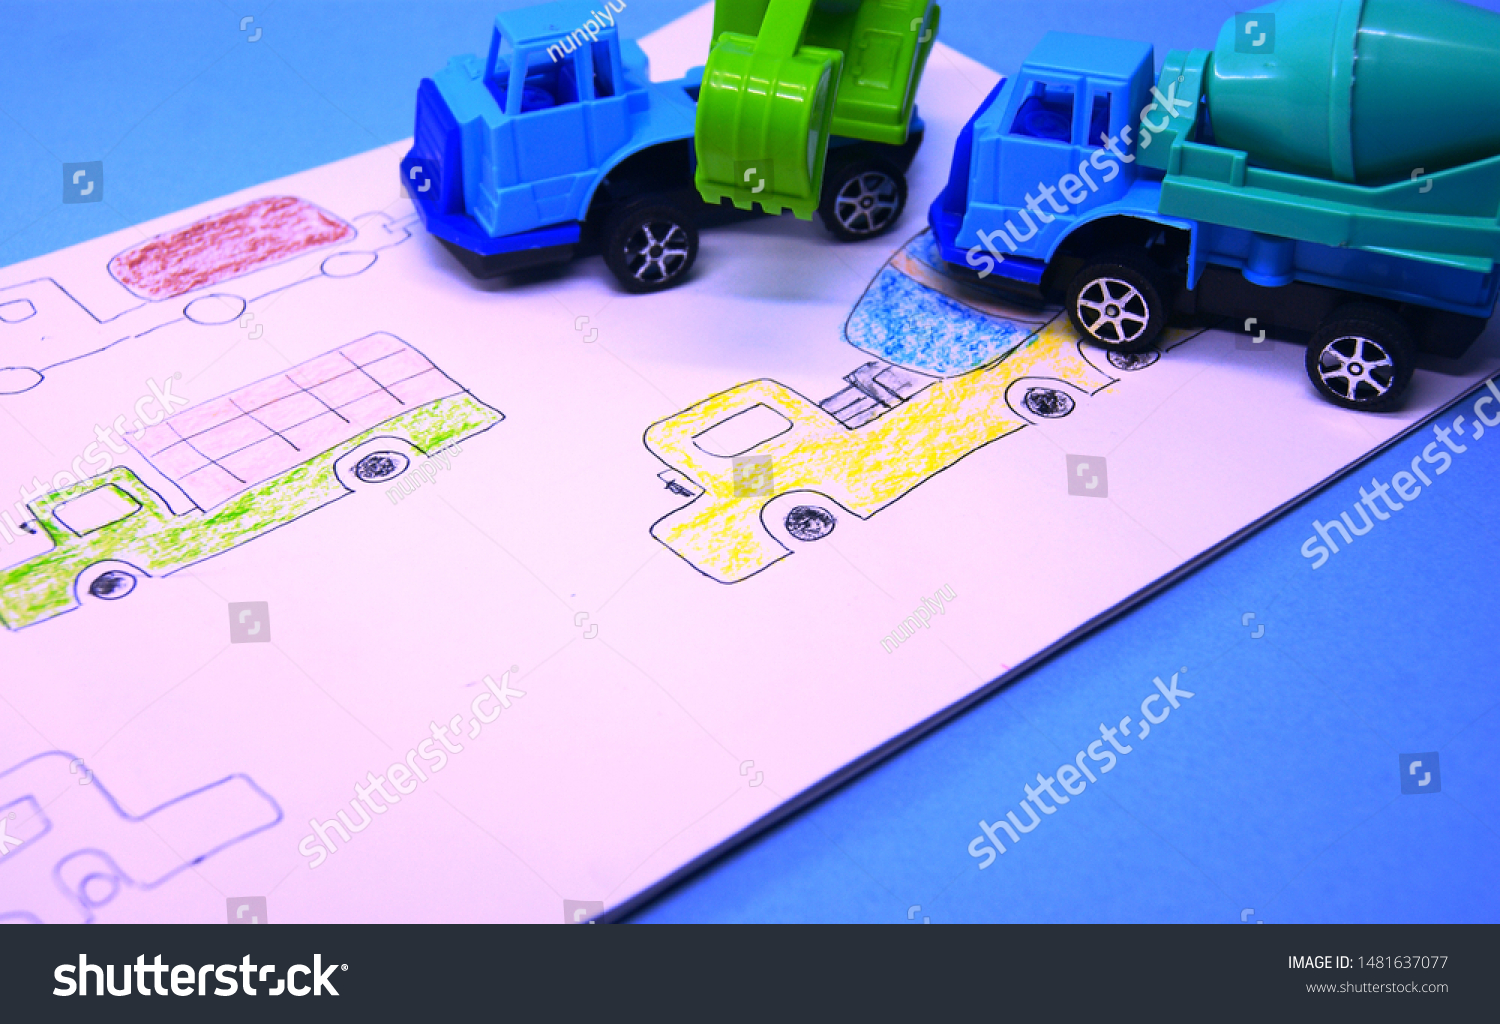 boy's drawing in drawing book and miniatures of excavator and concrete mixer truck #1481637077